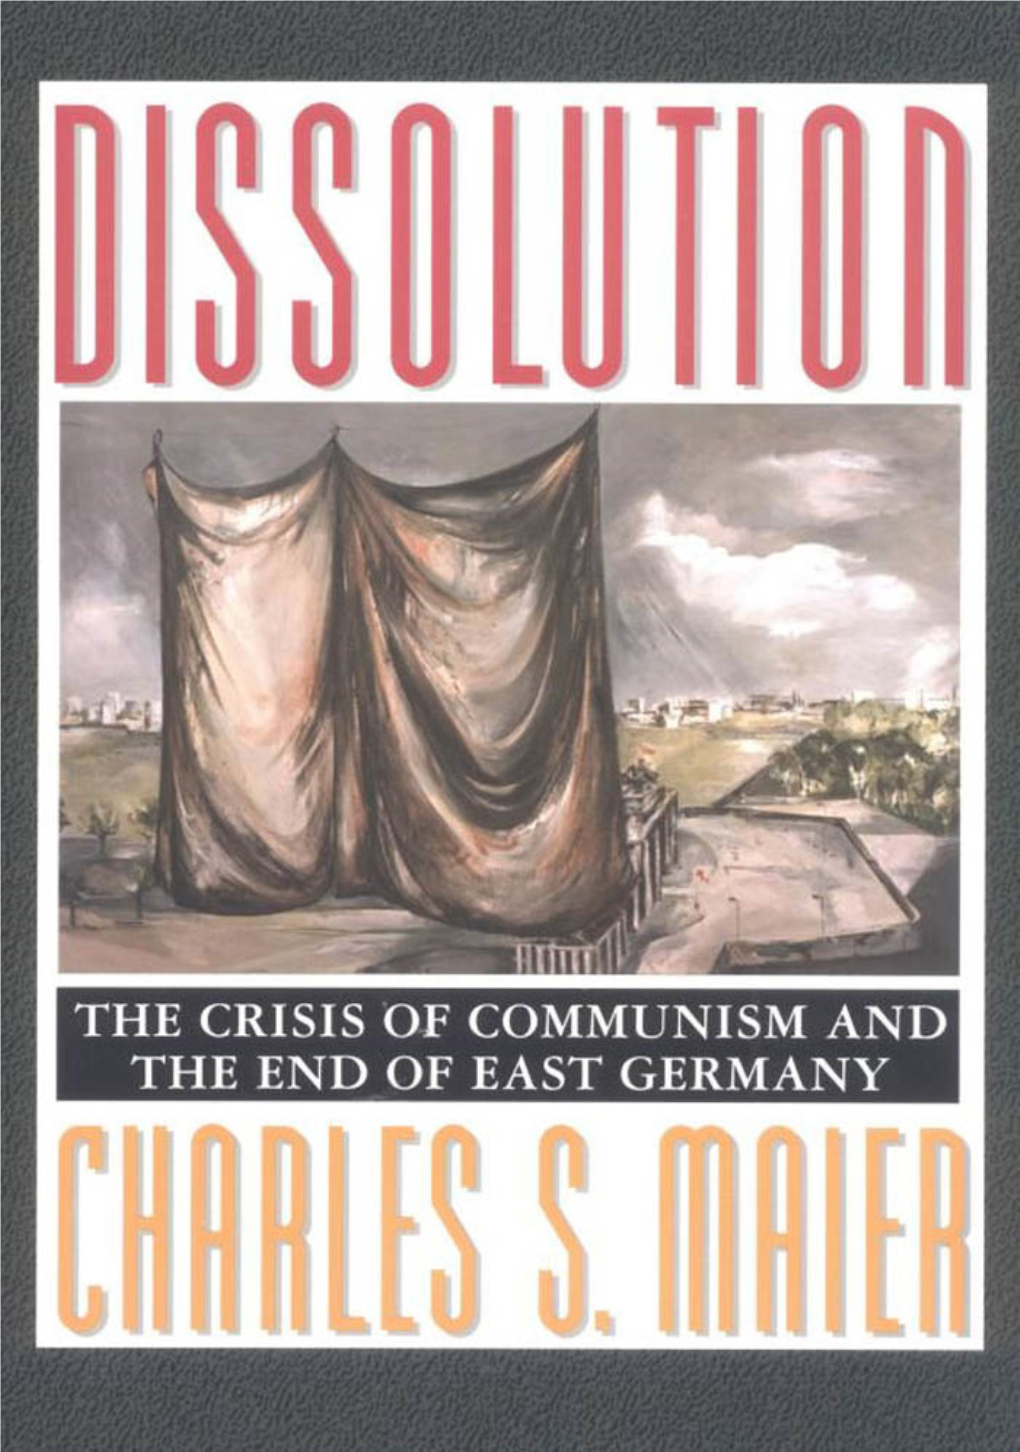 Dissolution: the Crisis of Communism and the End of East Germany